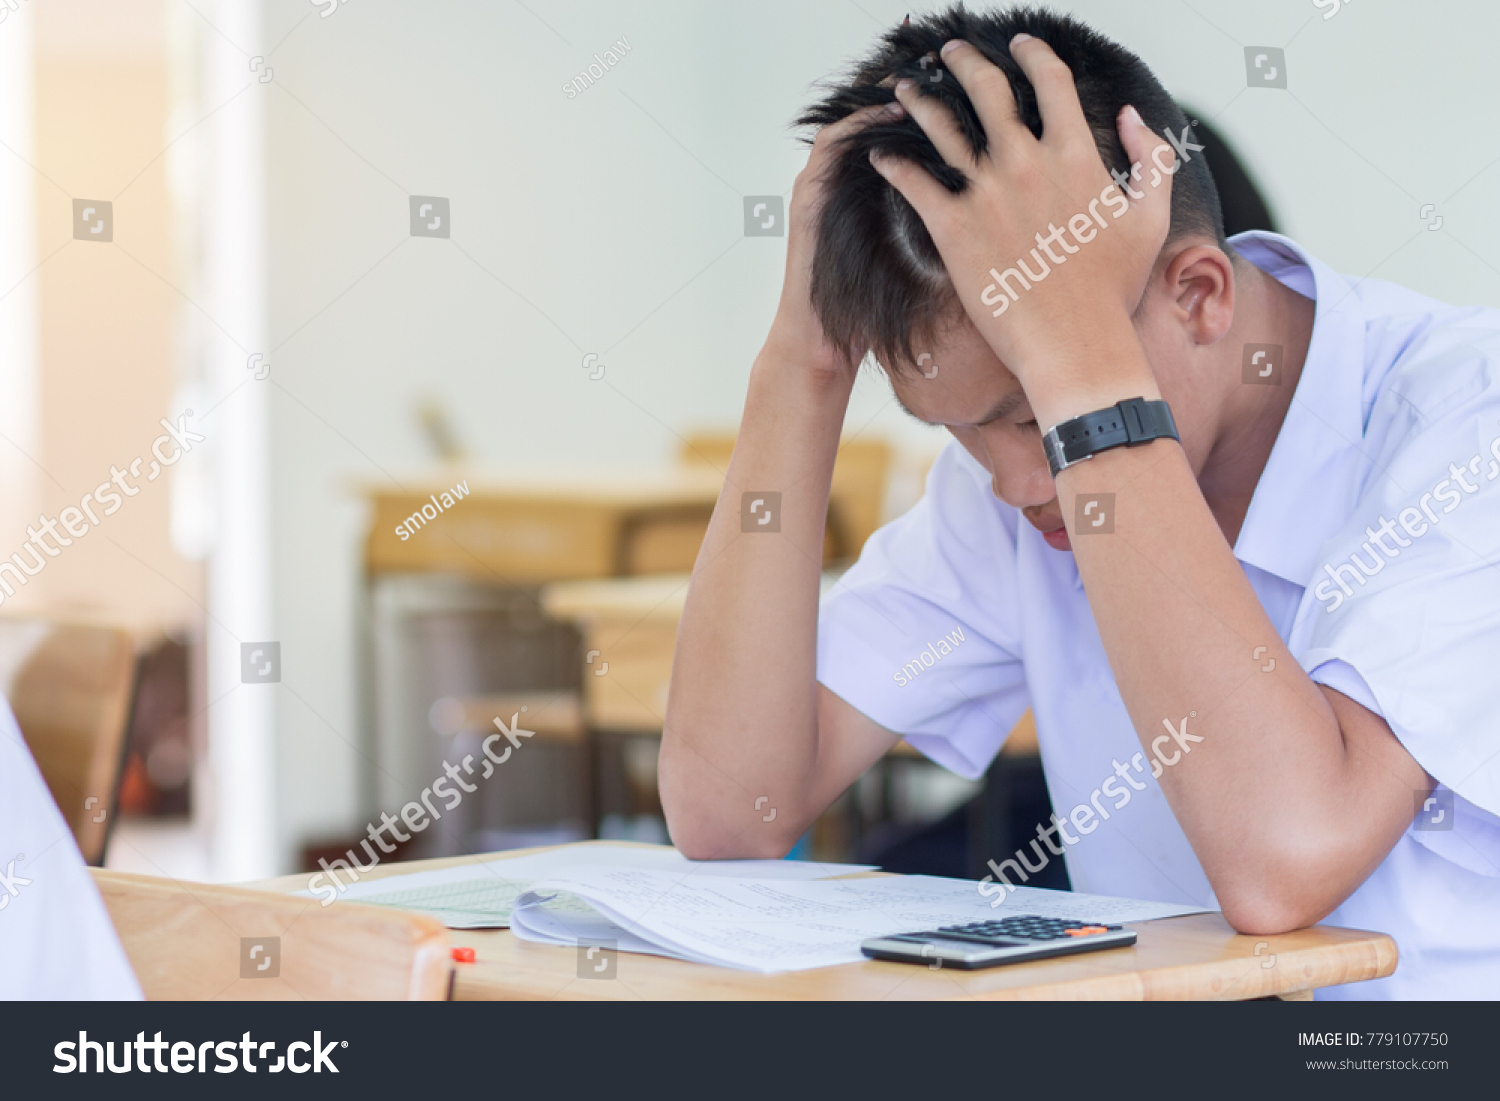 Asian boy student studying stressed headaches for test or exams in classroom, learning lessons doing final exam at high school with Thailand uniform in class room. Education system concept. #779107750